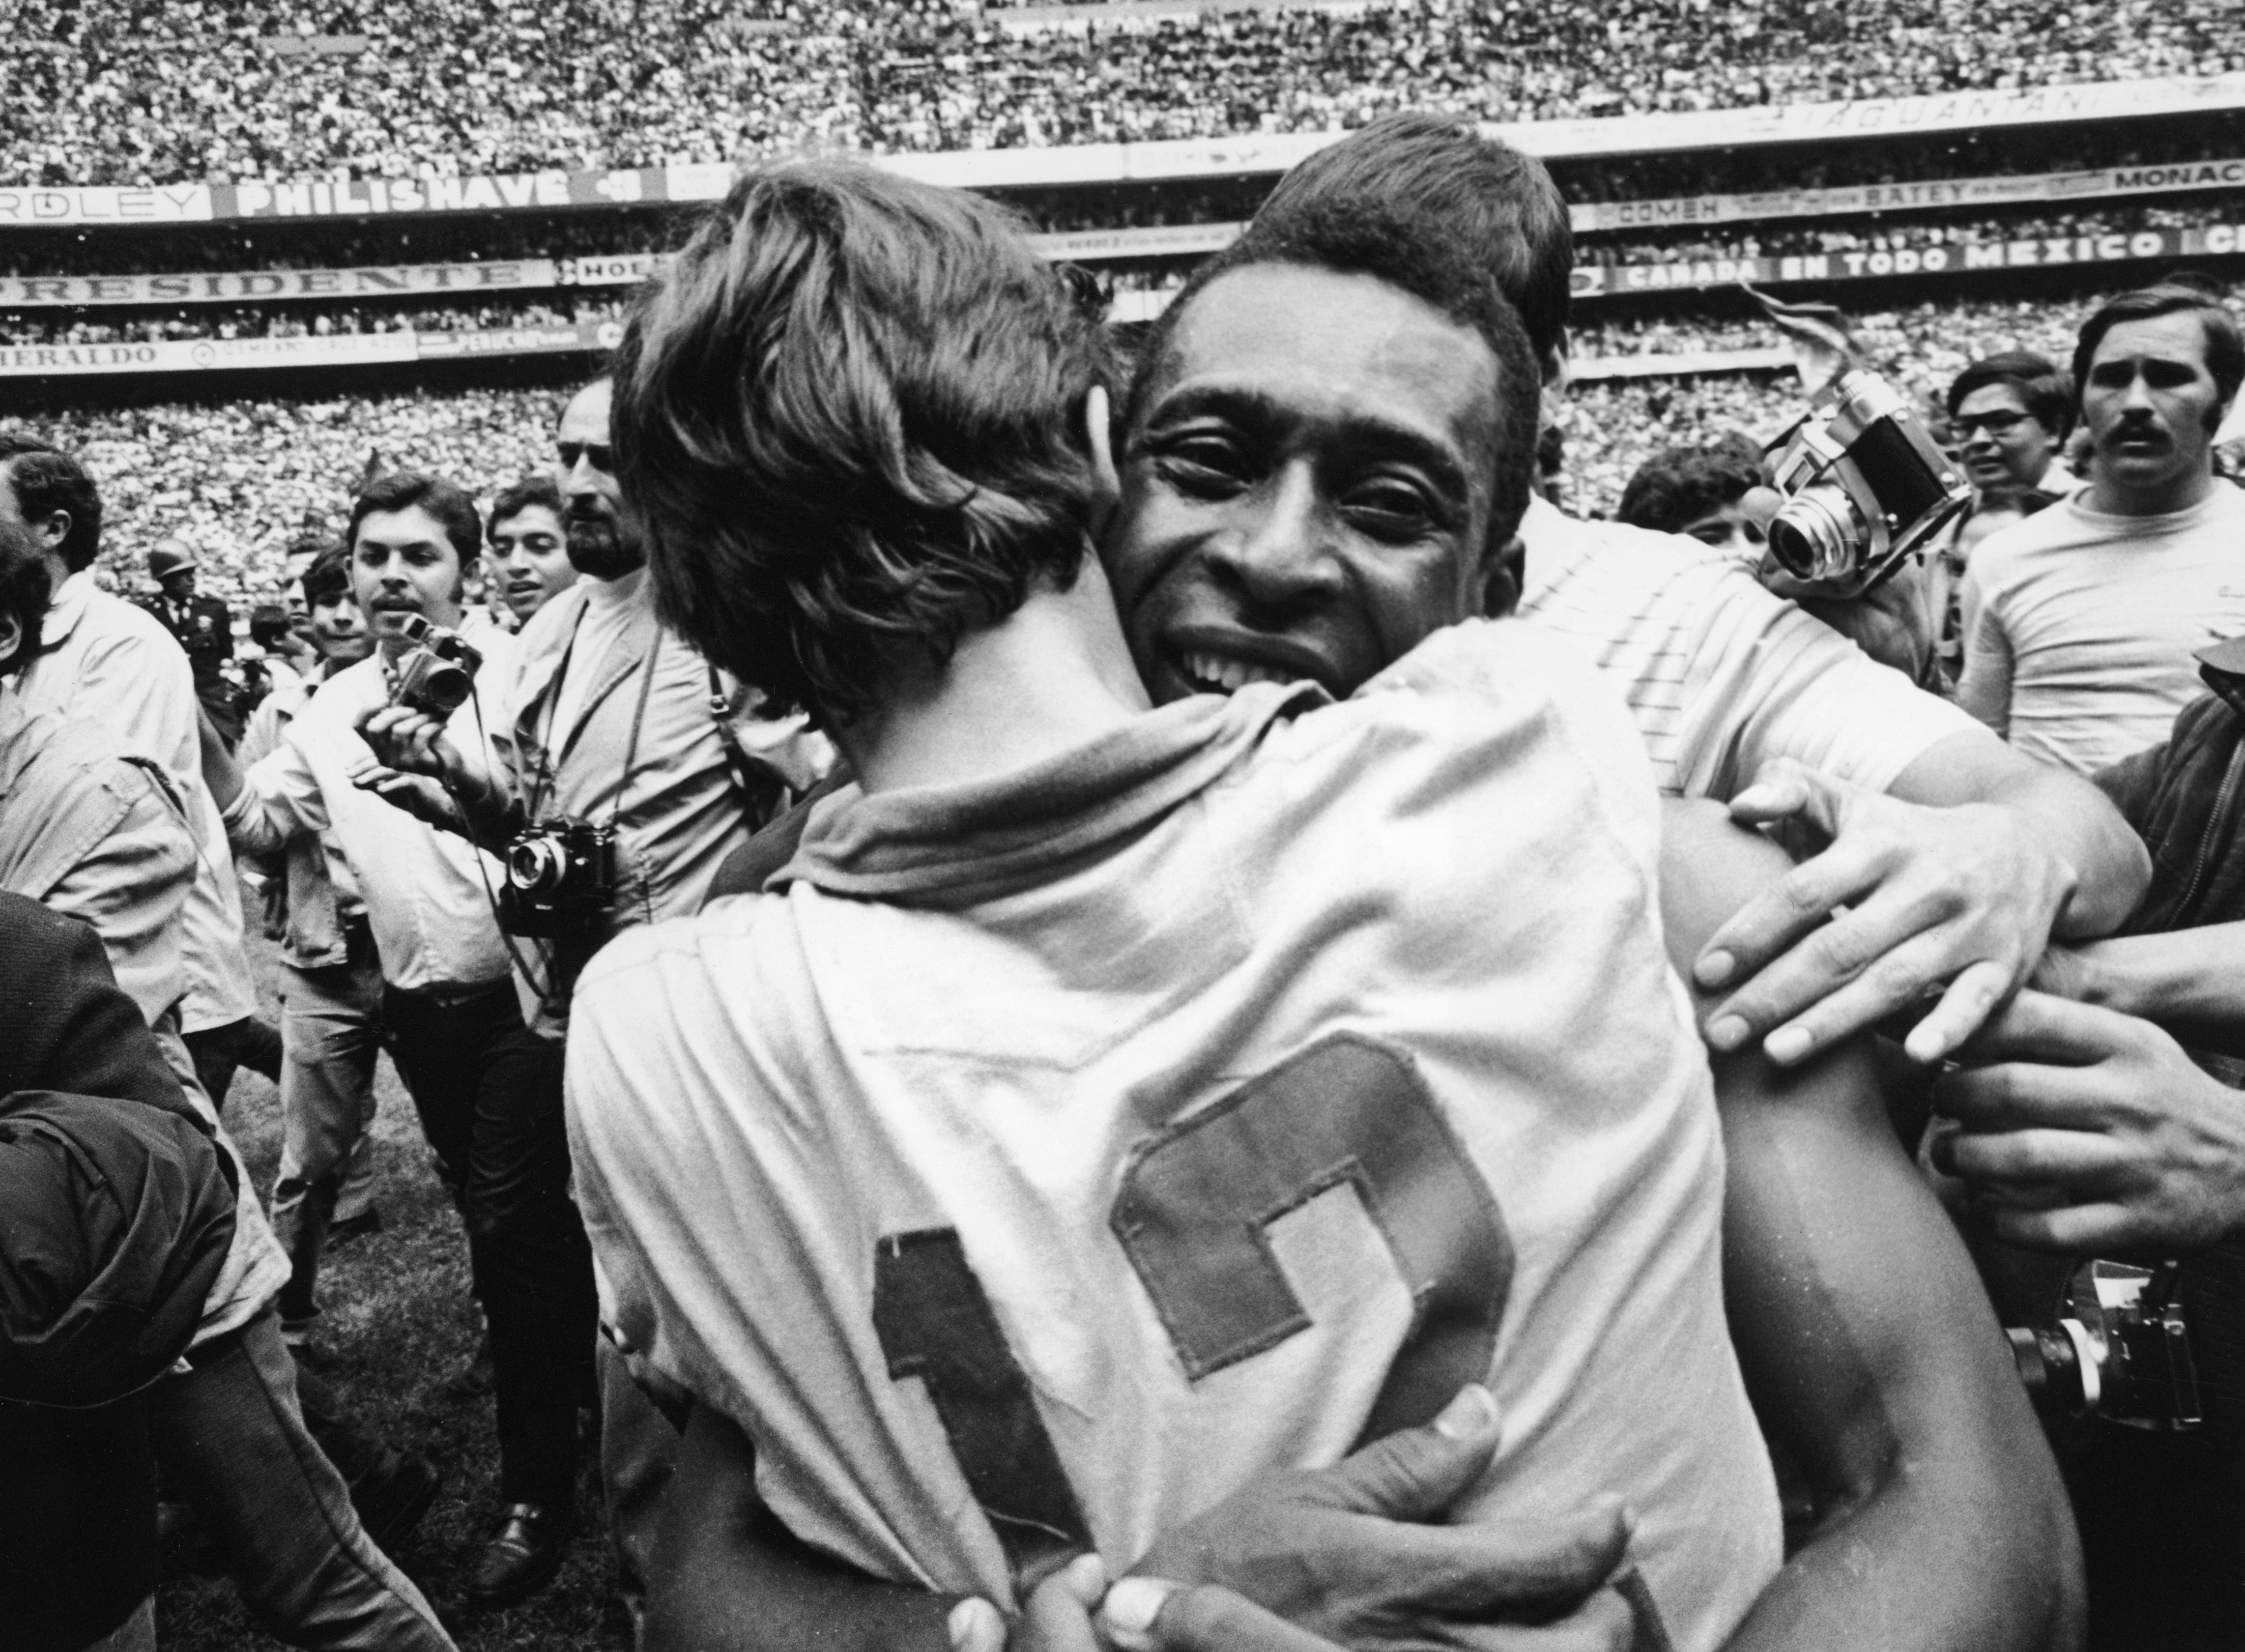 Pele embraces goalkeeper Ado after Brazil’s joyful dismantling of Italy in the 1970 World Cup final